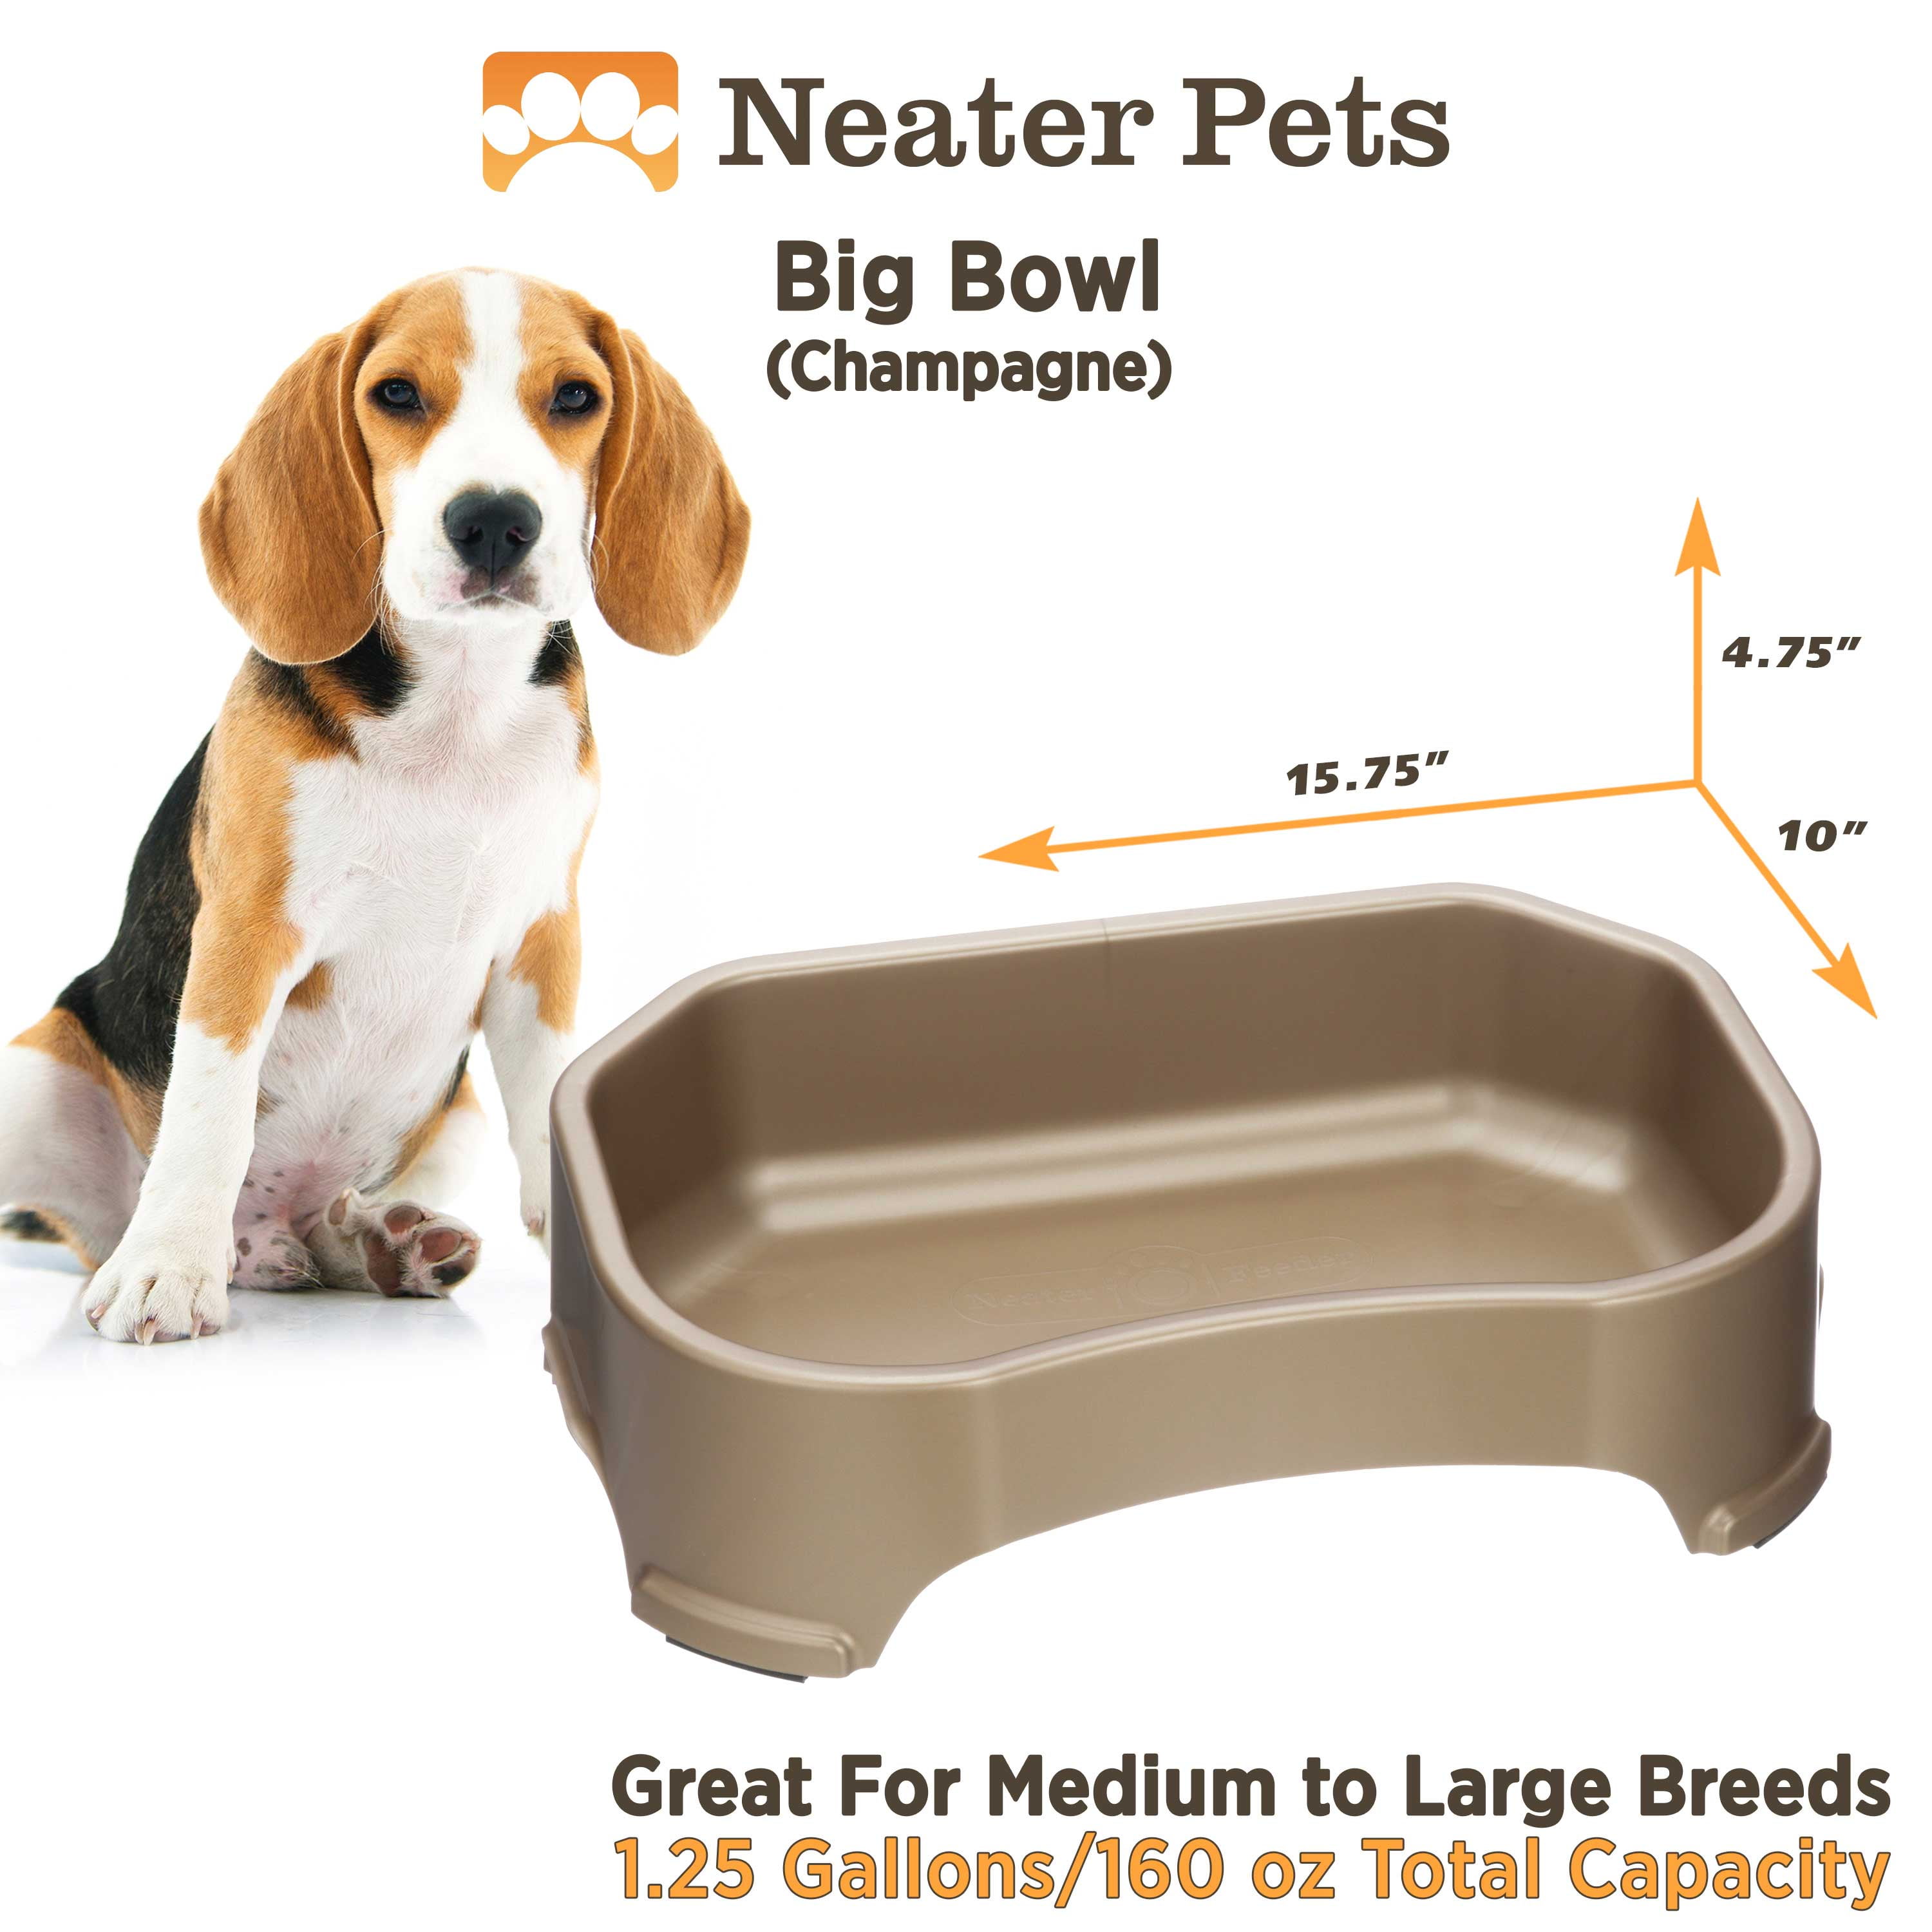 Big dog water bowl. Easy to clean and waters the trees when